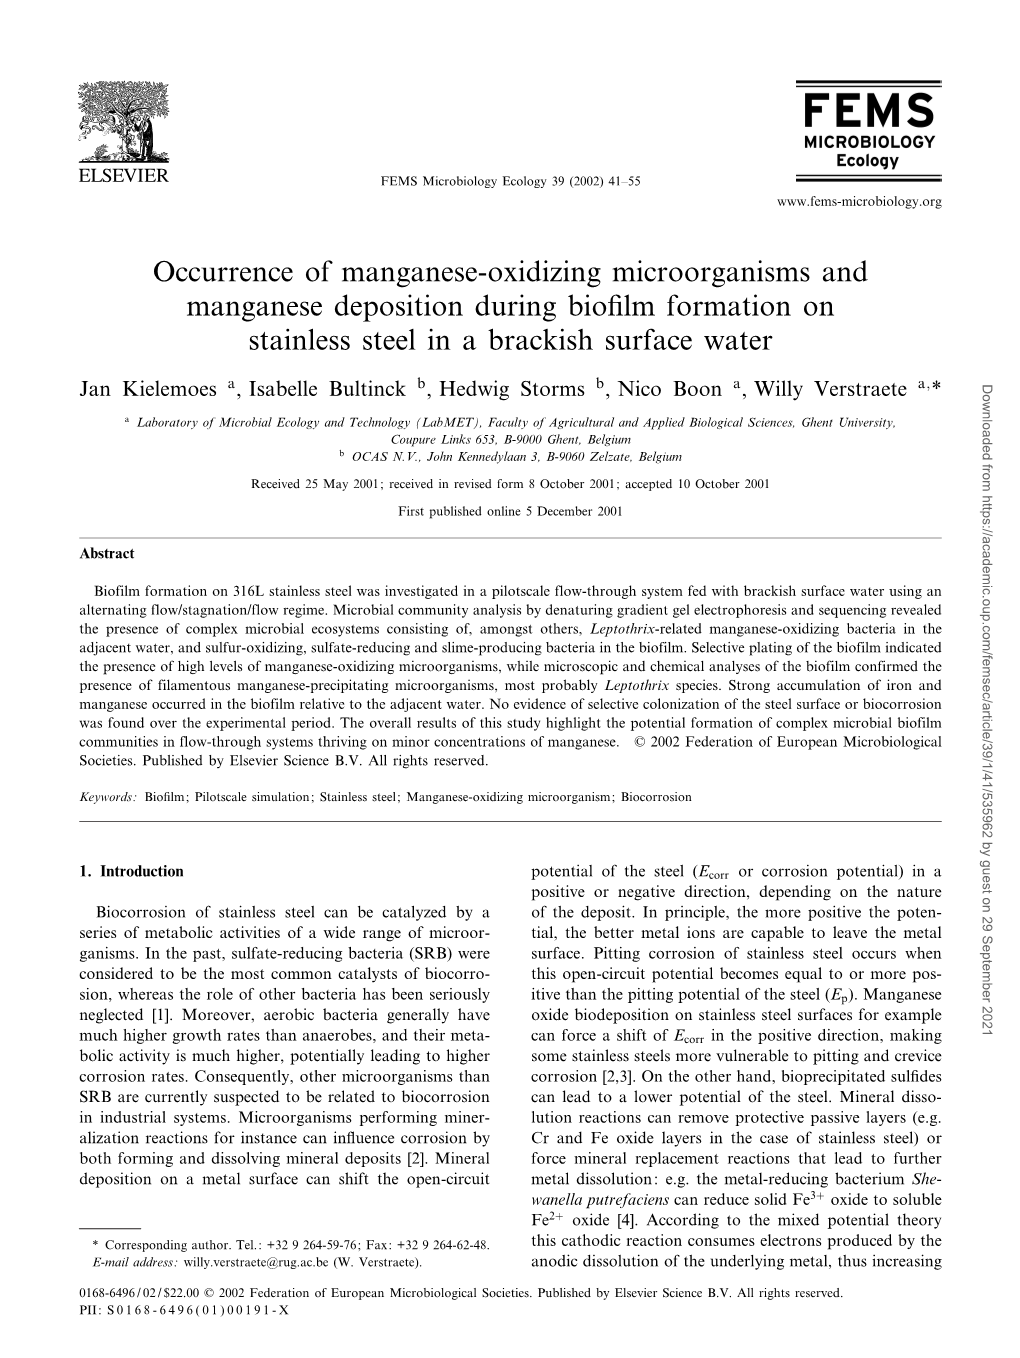 Occurrence of Manganese-Oxidizing Microorganisms and Manganese Deposition During Bio¢Lm Formation on Stainless Steel in a Brackish Surface Water